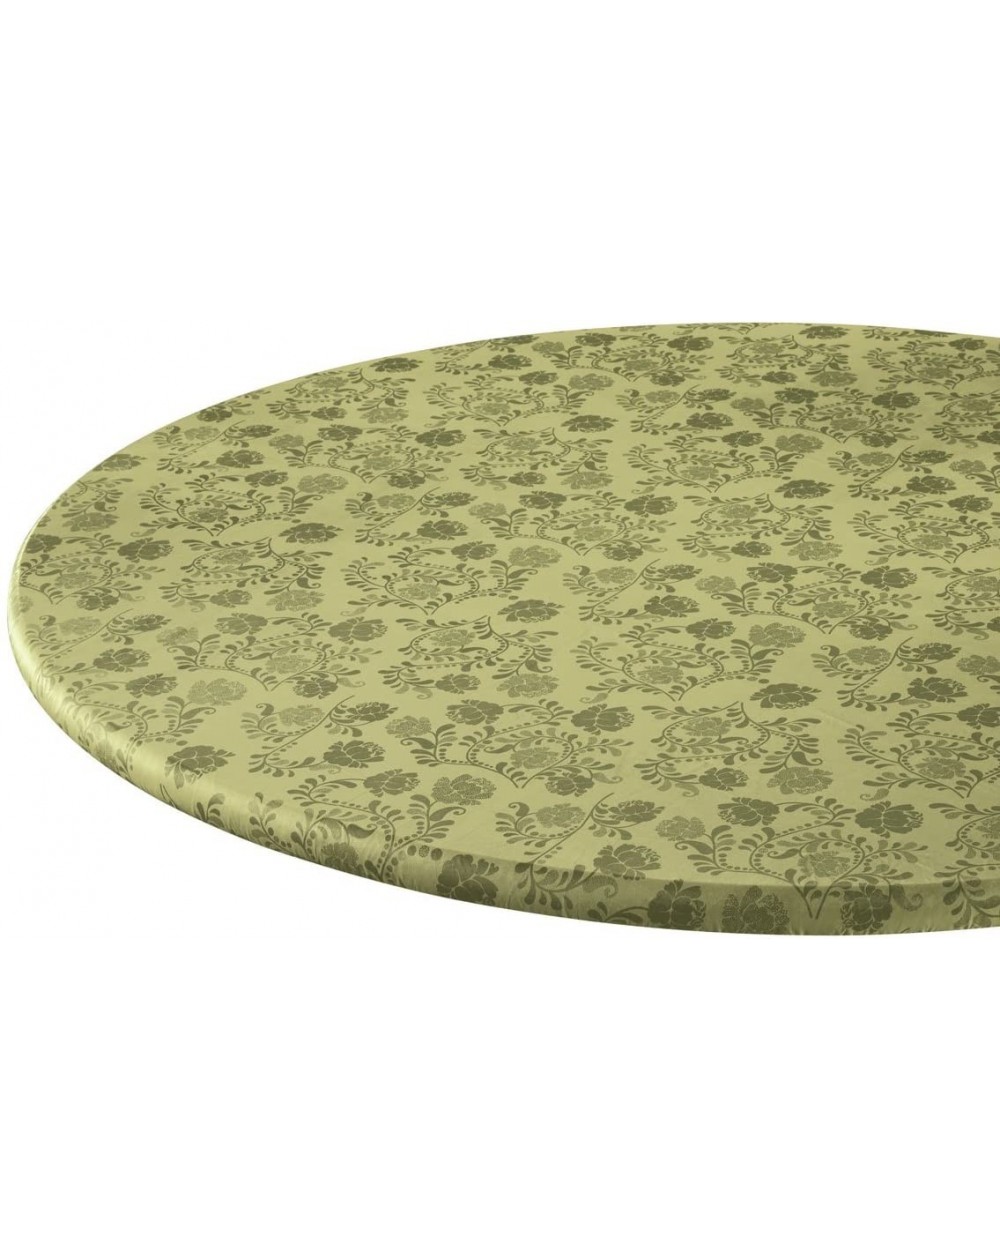 Tablecovers The Kathleen Vinyl Elasticized Table Cover by HSKTM 40" - 44" Dia. Round - CA189XALX6M $21.52